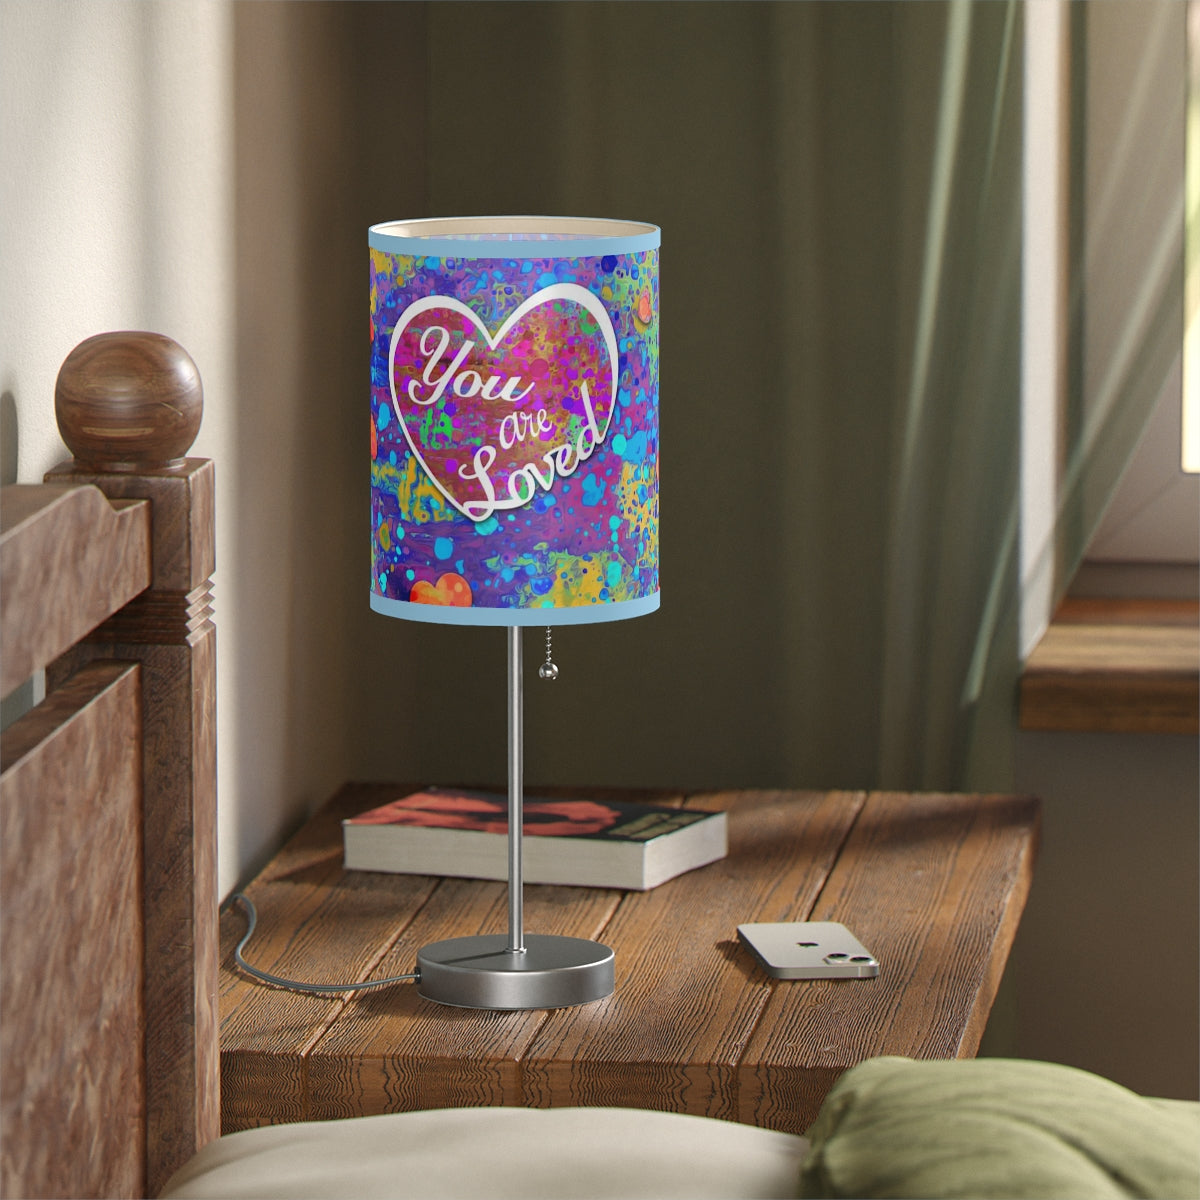 Lamp on a Stand, US|CA plug - You are Loved